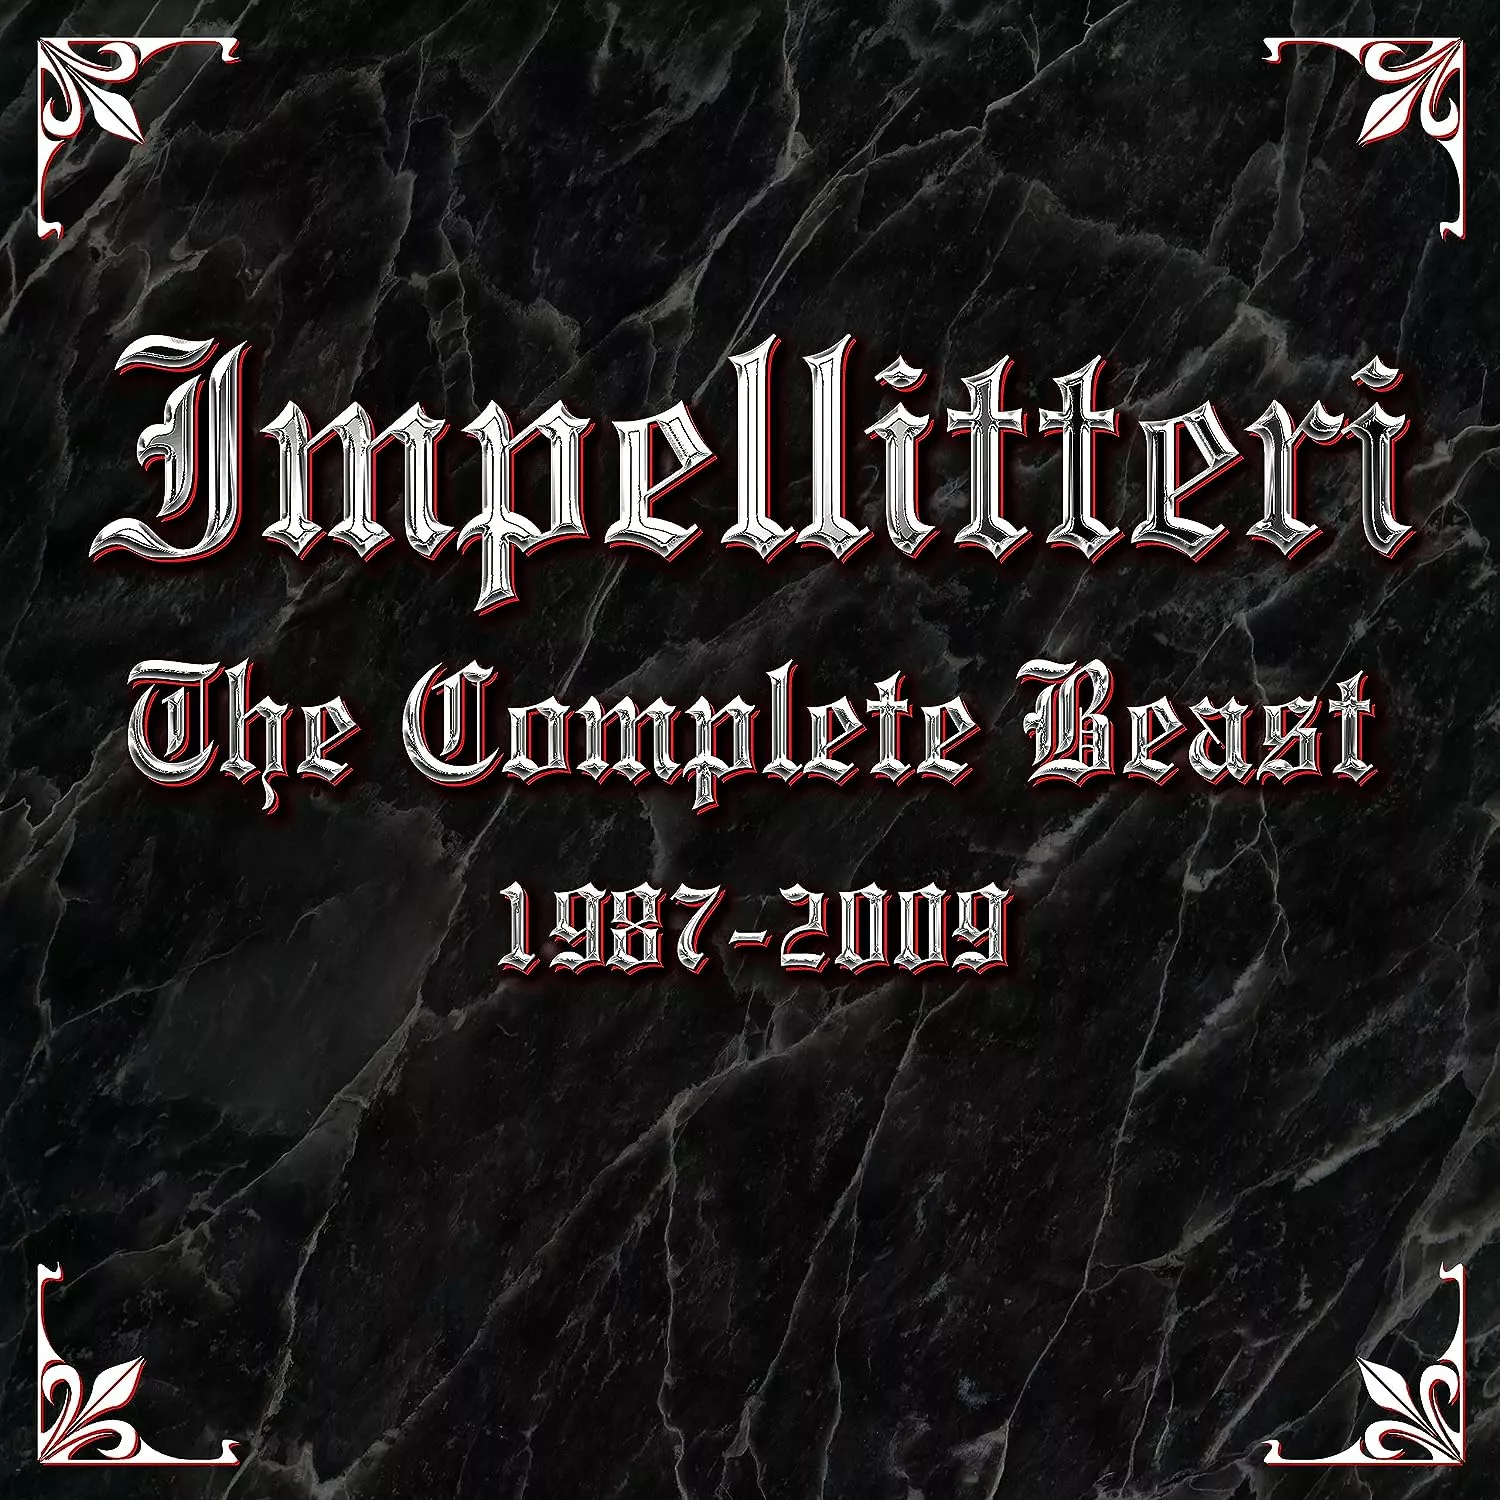 IMPELLITERI - The Complete Beast 1987-2000 [6CD CLAMSHELL BOXSET]